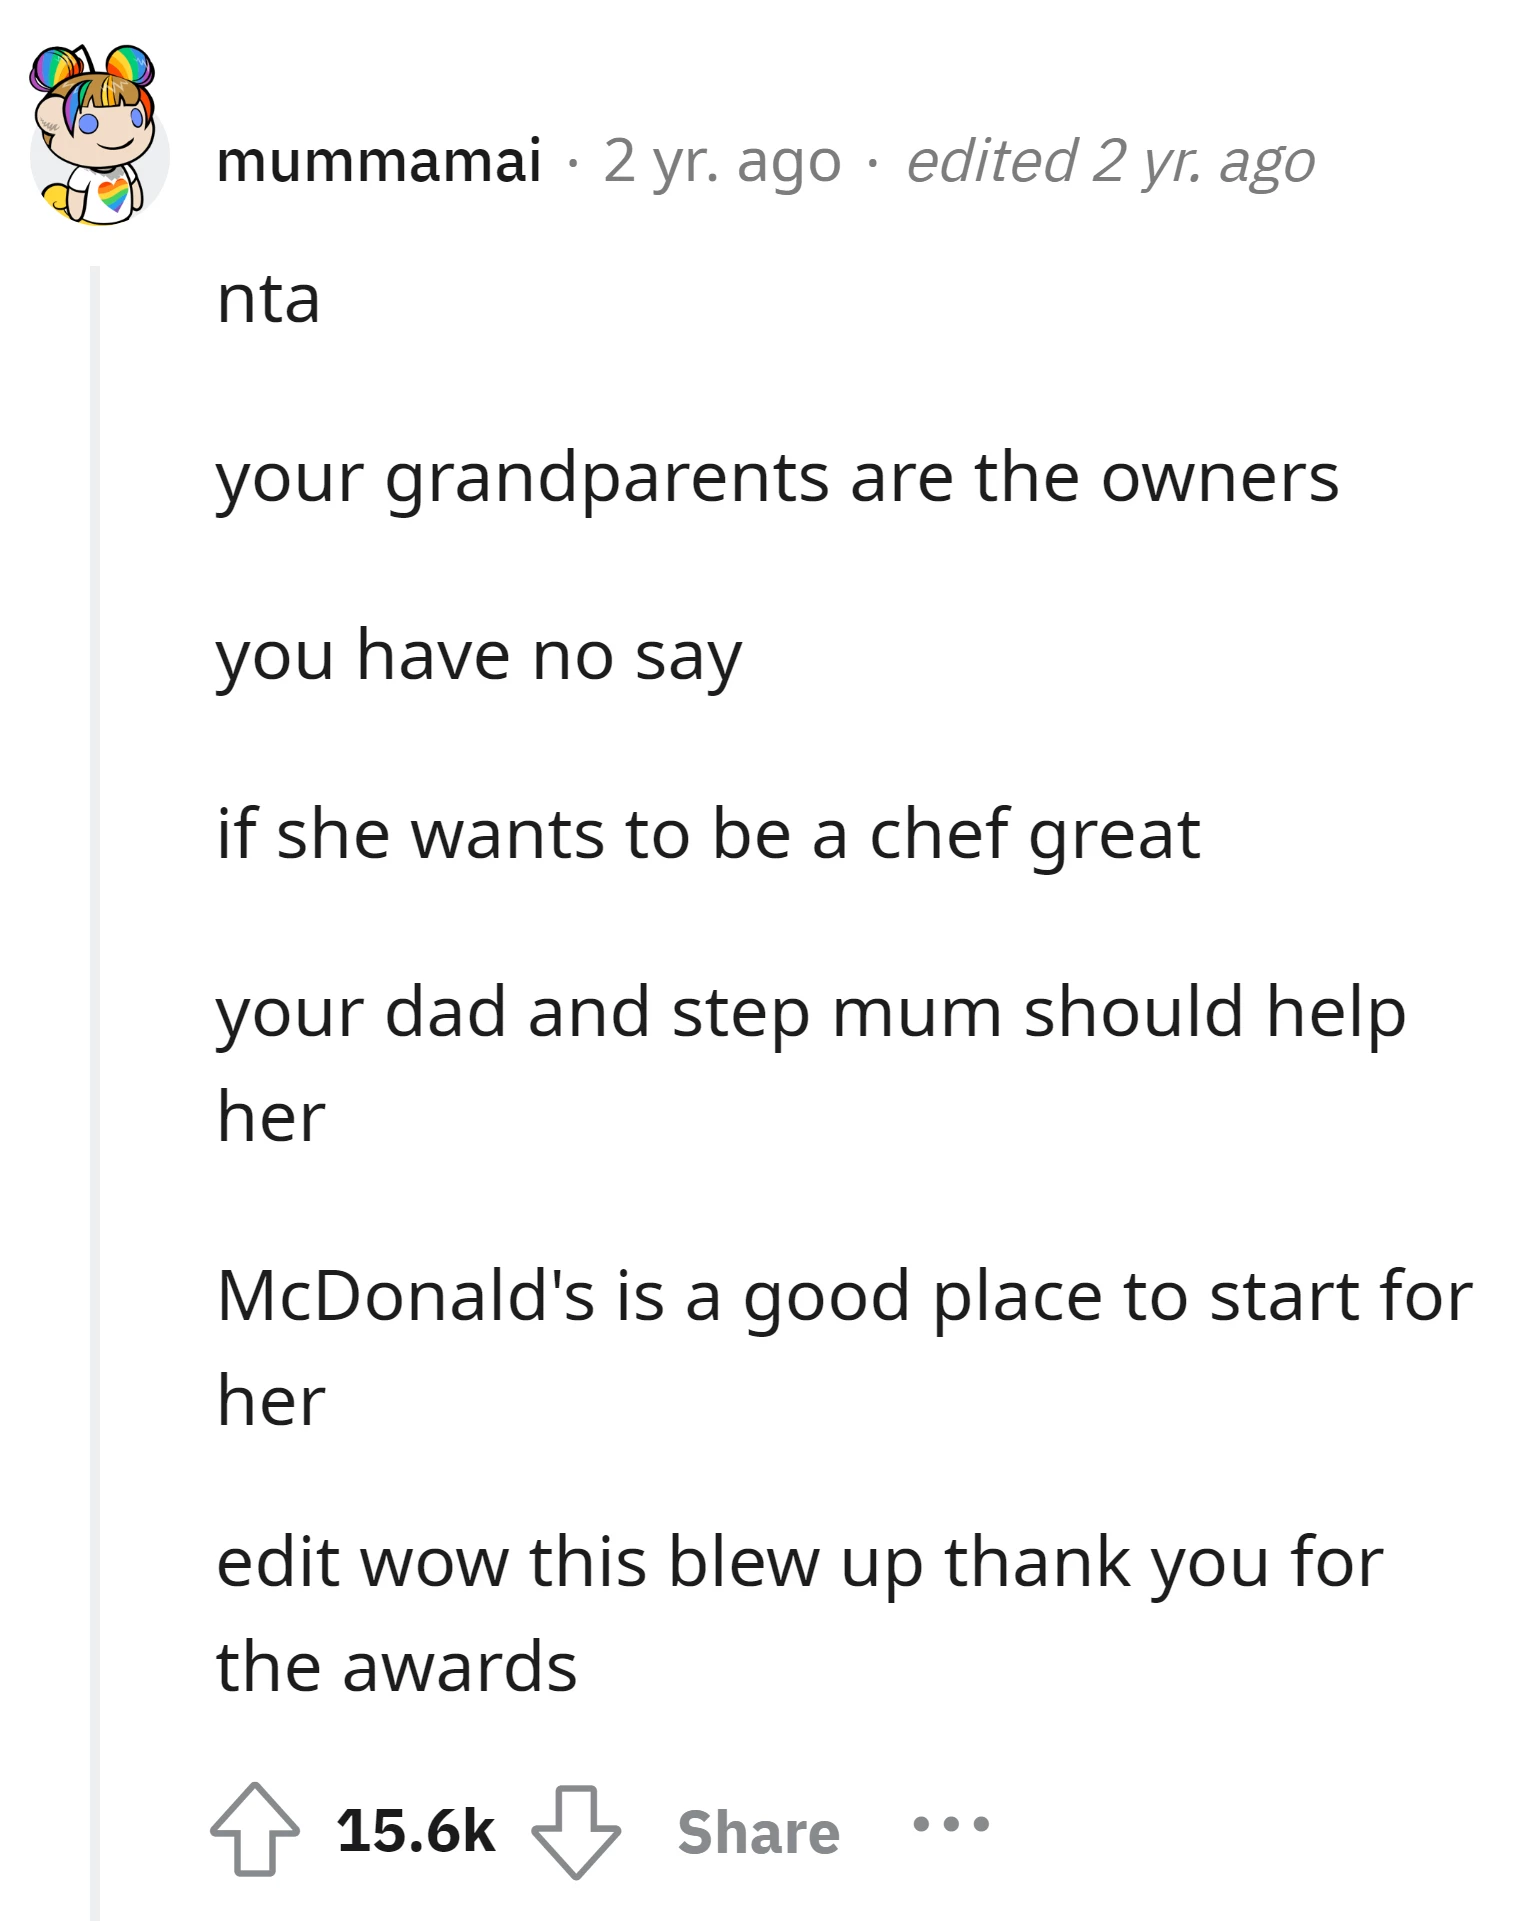 Since the grandparents own the restaurant, the OP has no say